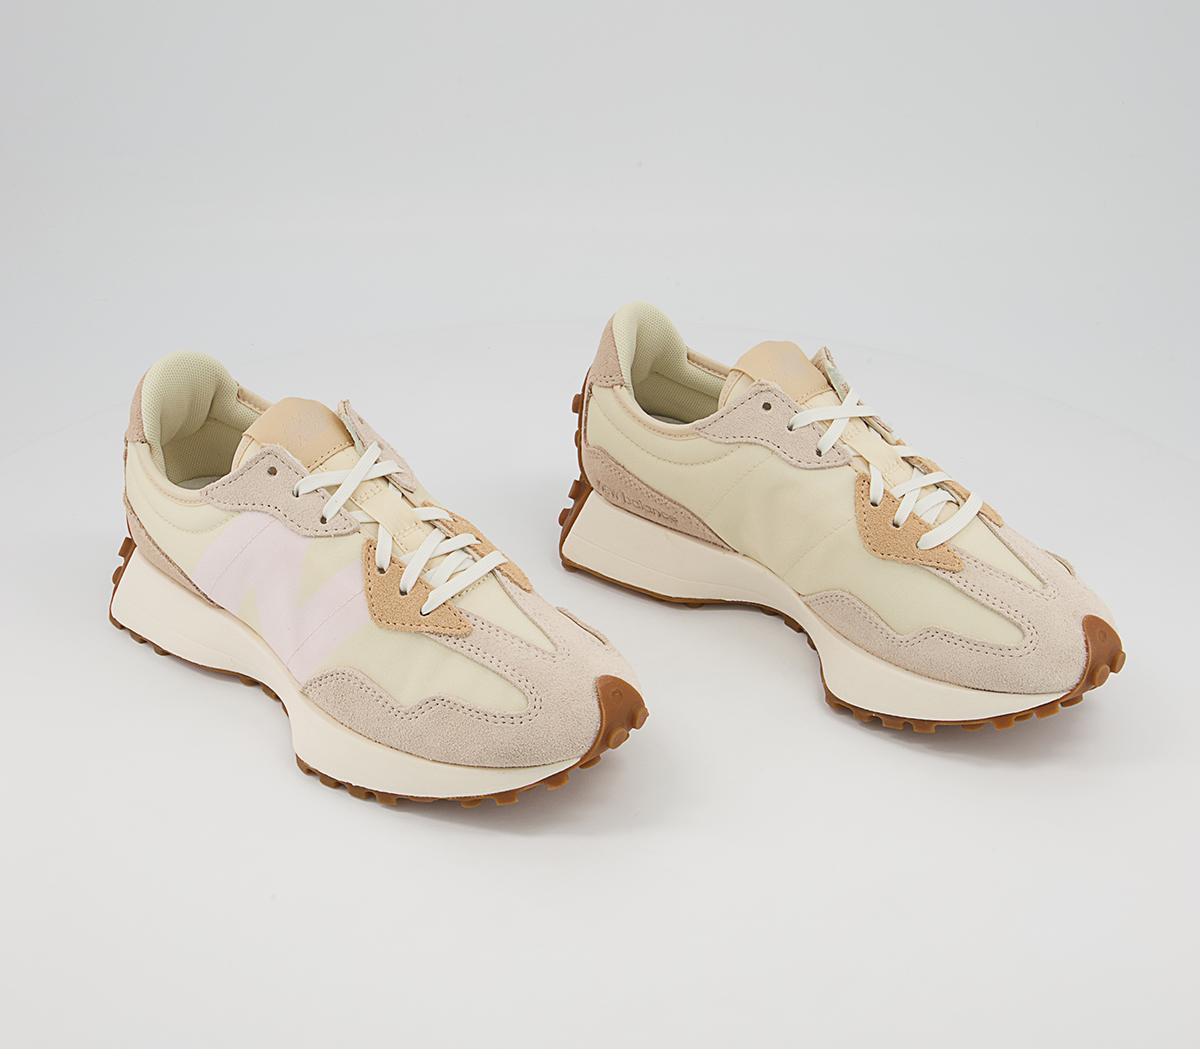 New Balance 327 Trainers Oatmeal Crystal Pink Beige - Women's Trainers